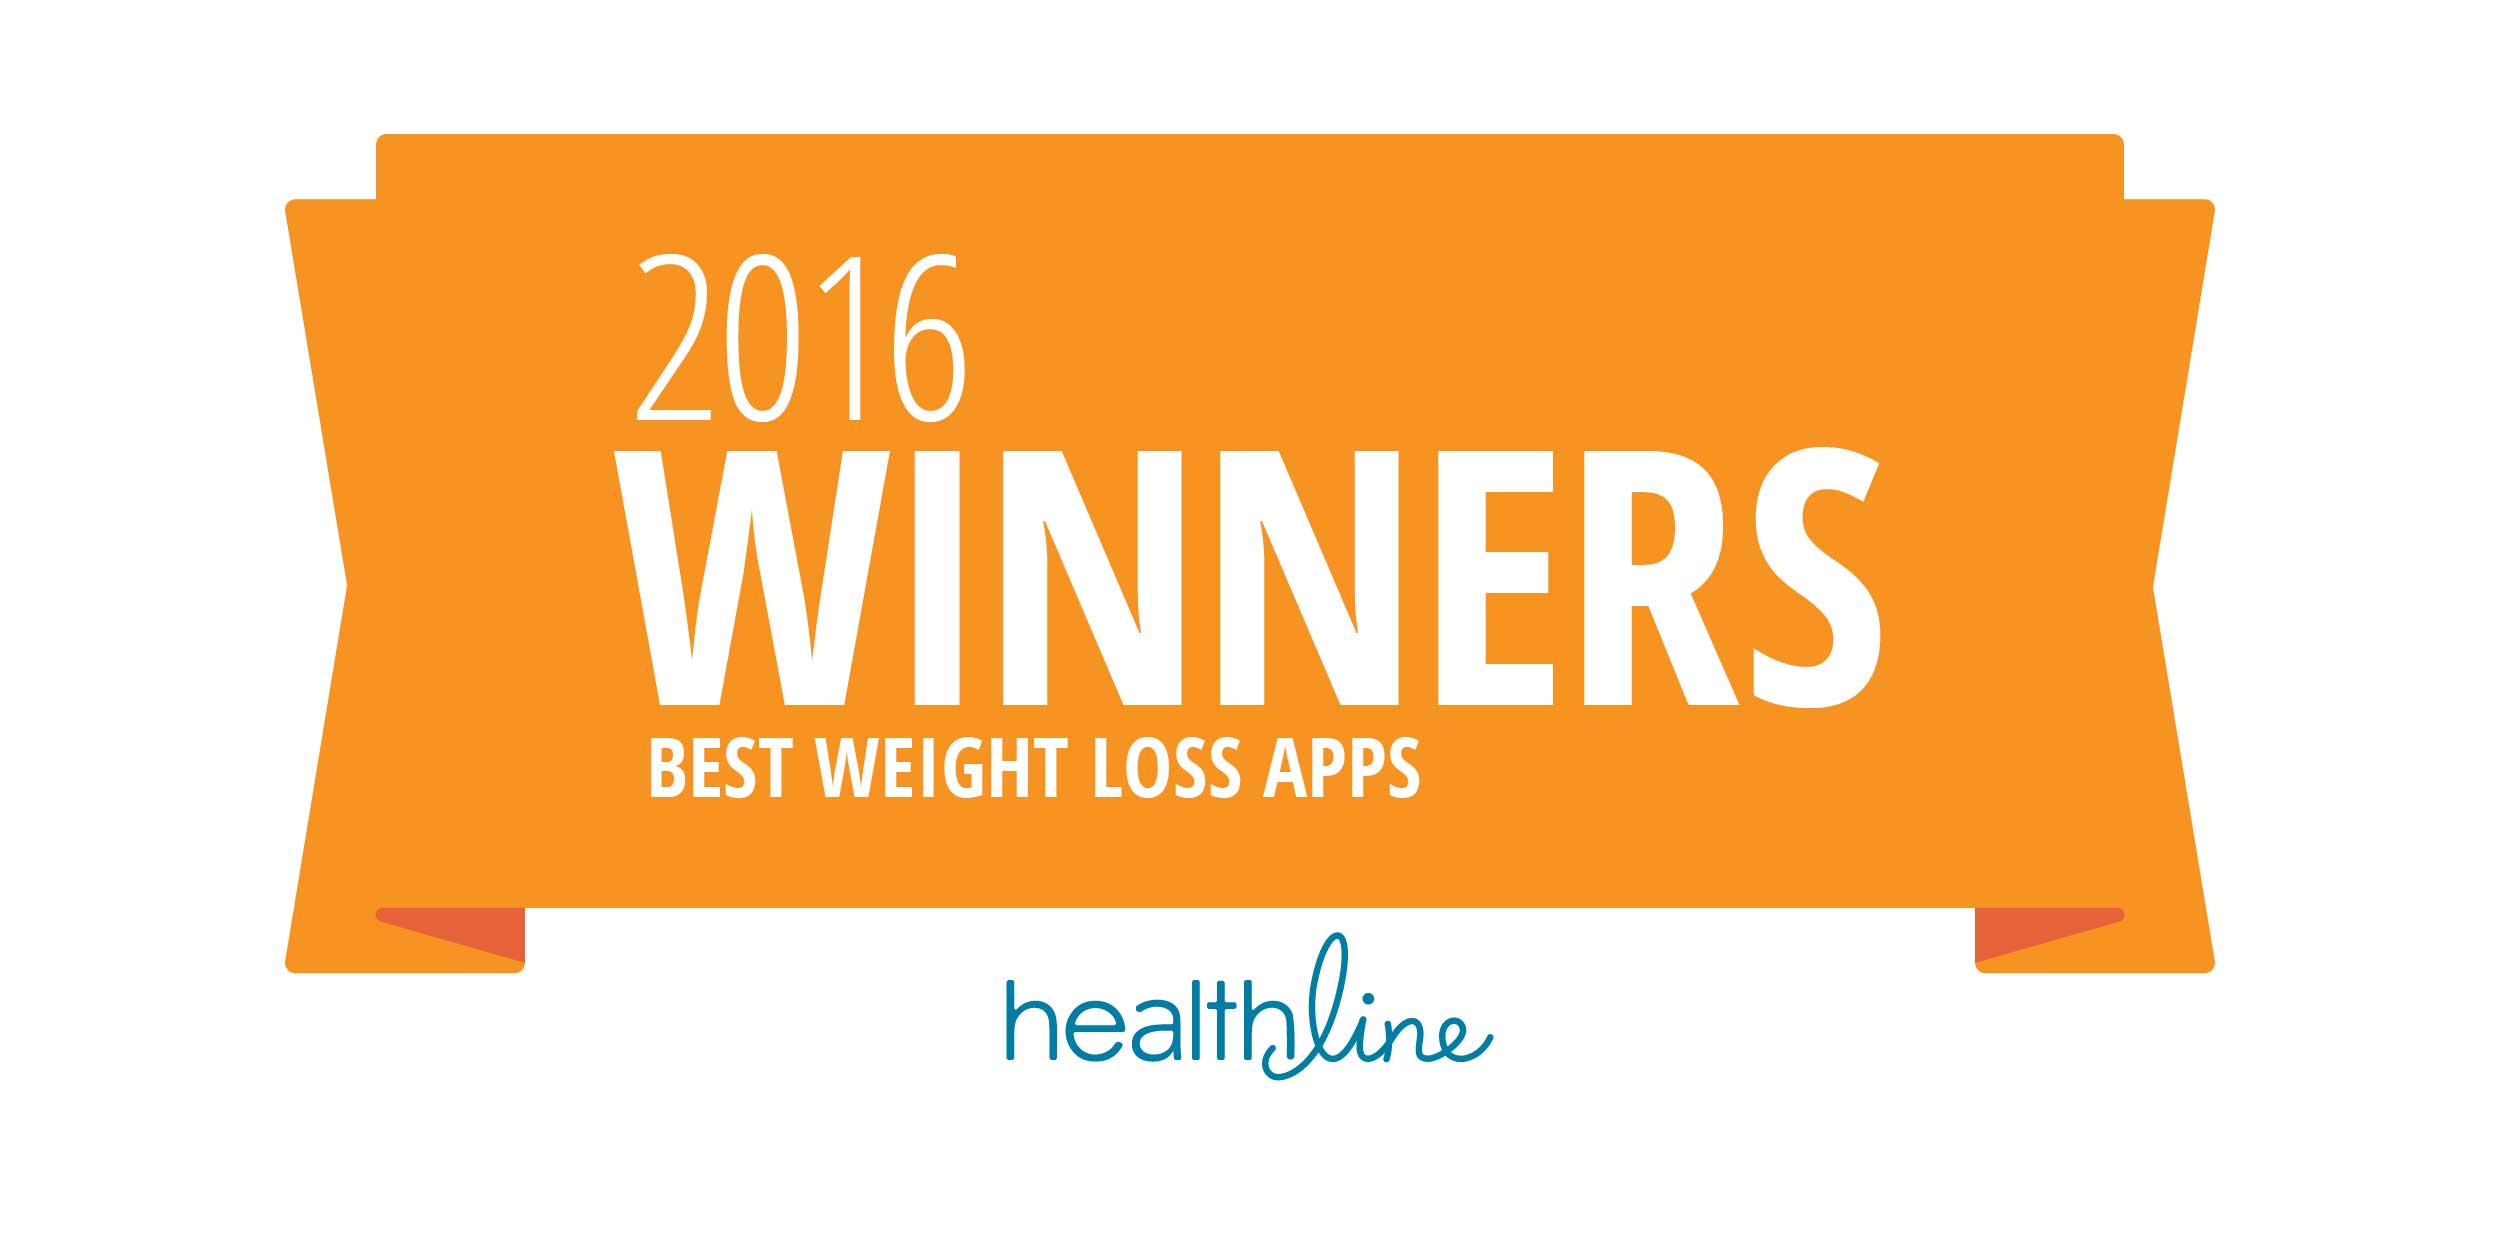 The Best Weight Loss Apps of the Year